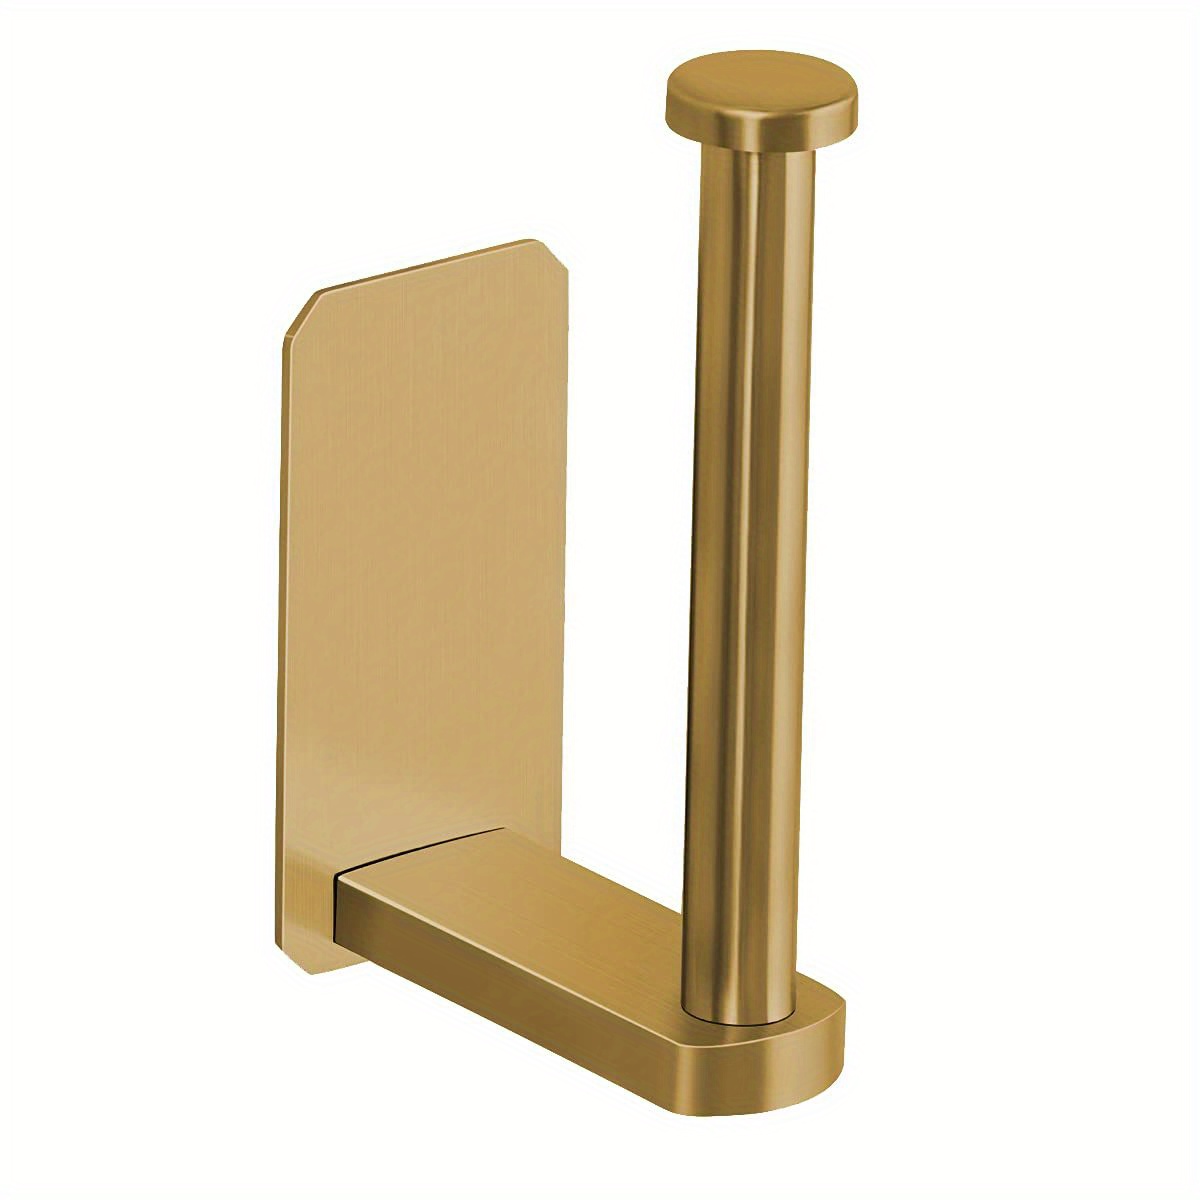 Noonext Toilet Paper Holder Gold, Adhesive Toilet Paper Holder with Phone  Shelf, Toilet Paper Roll Holder SUS304 Stainless Steel, Self Adhesive or